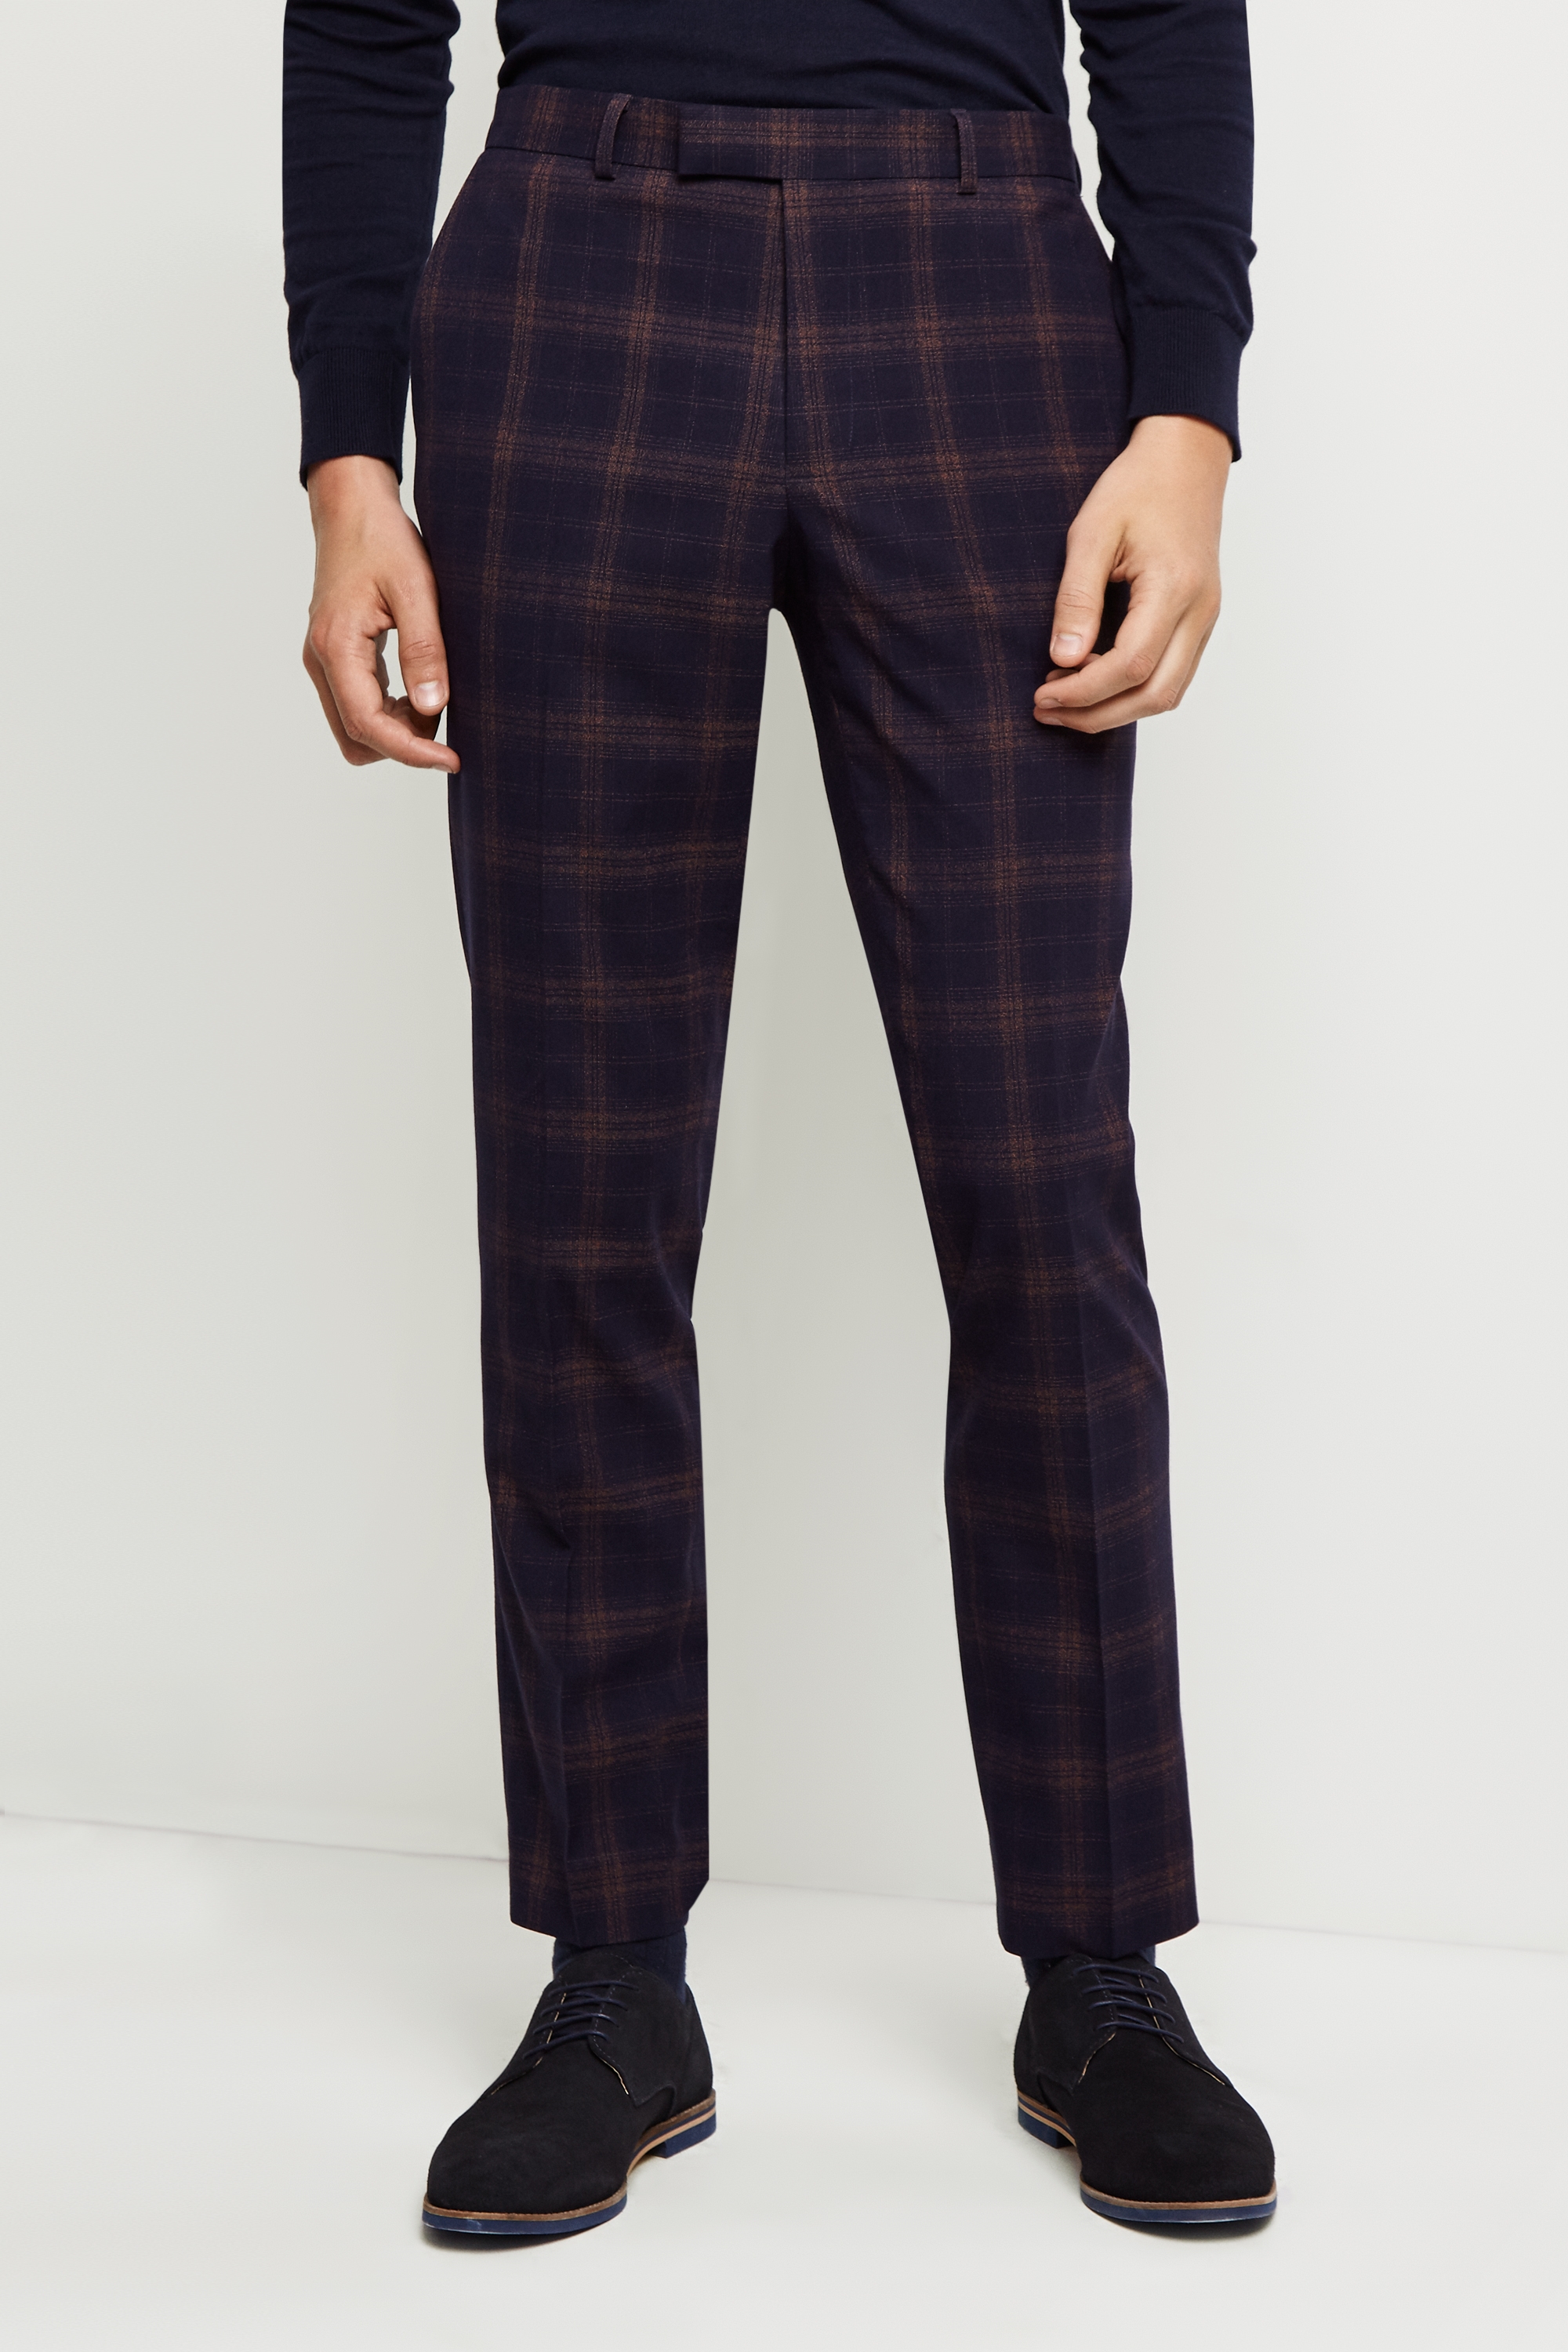 Moss London Skinny Fit Navy Rust Check Trousers